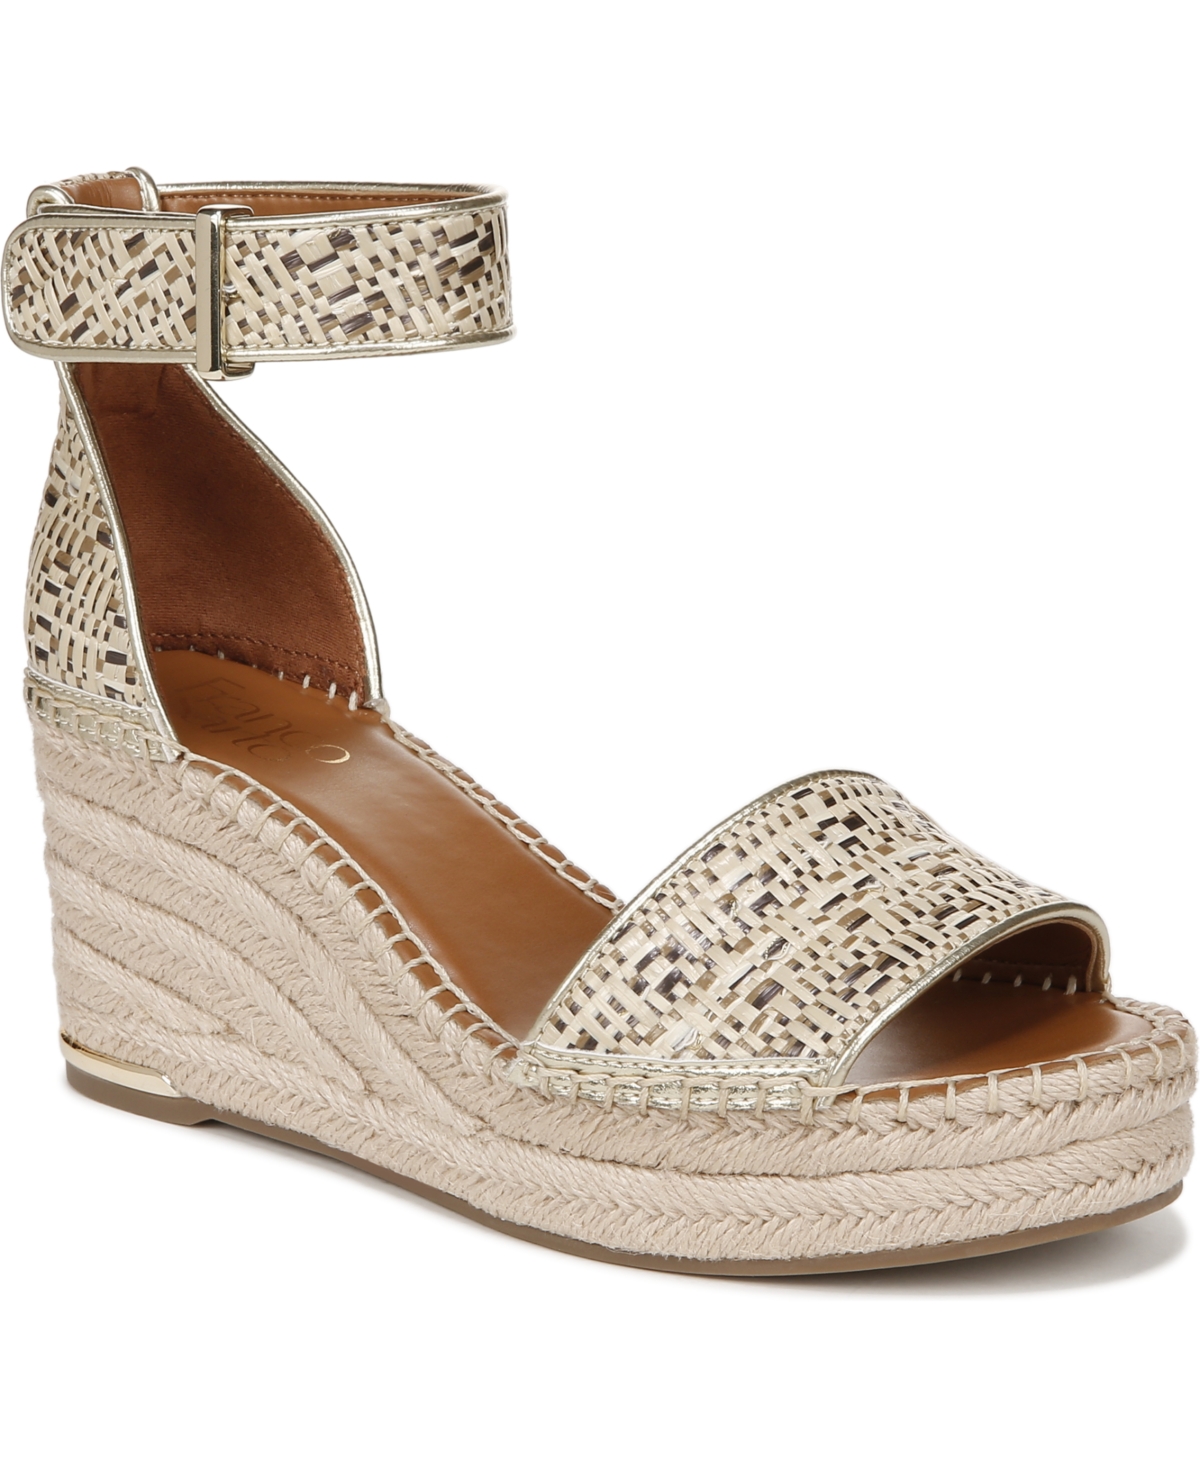 Franco Sarto Clemens Espadrille Wedge Sandals In Natural Multi Fabric